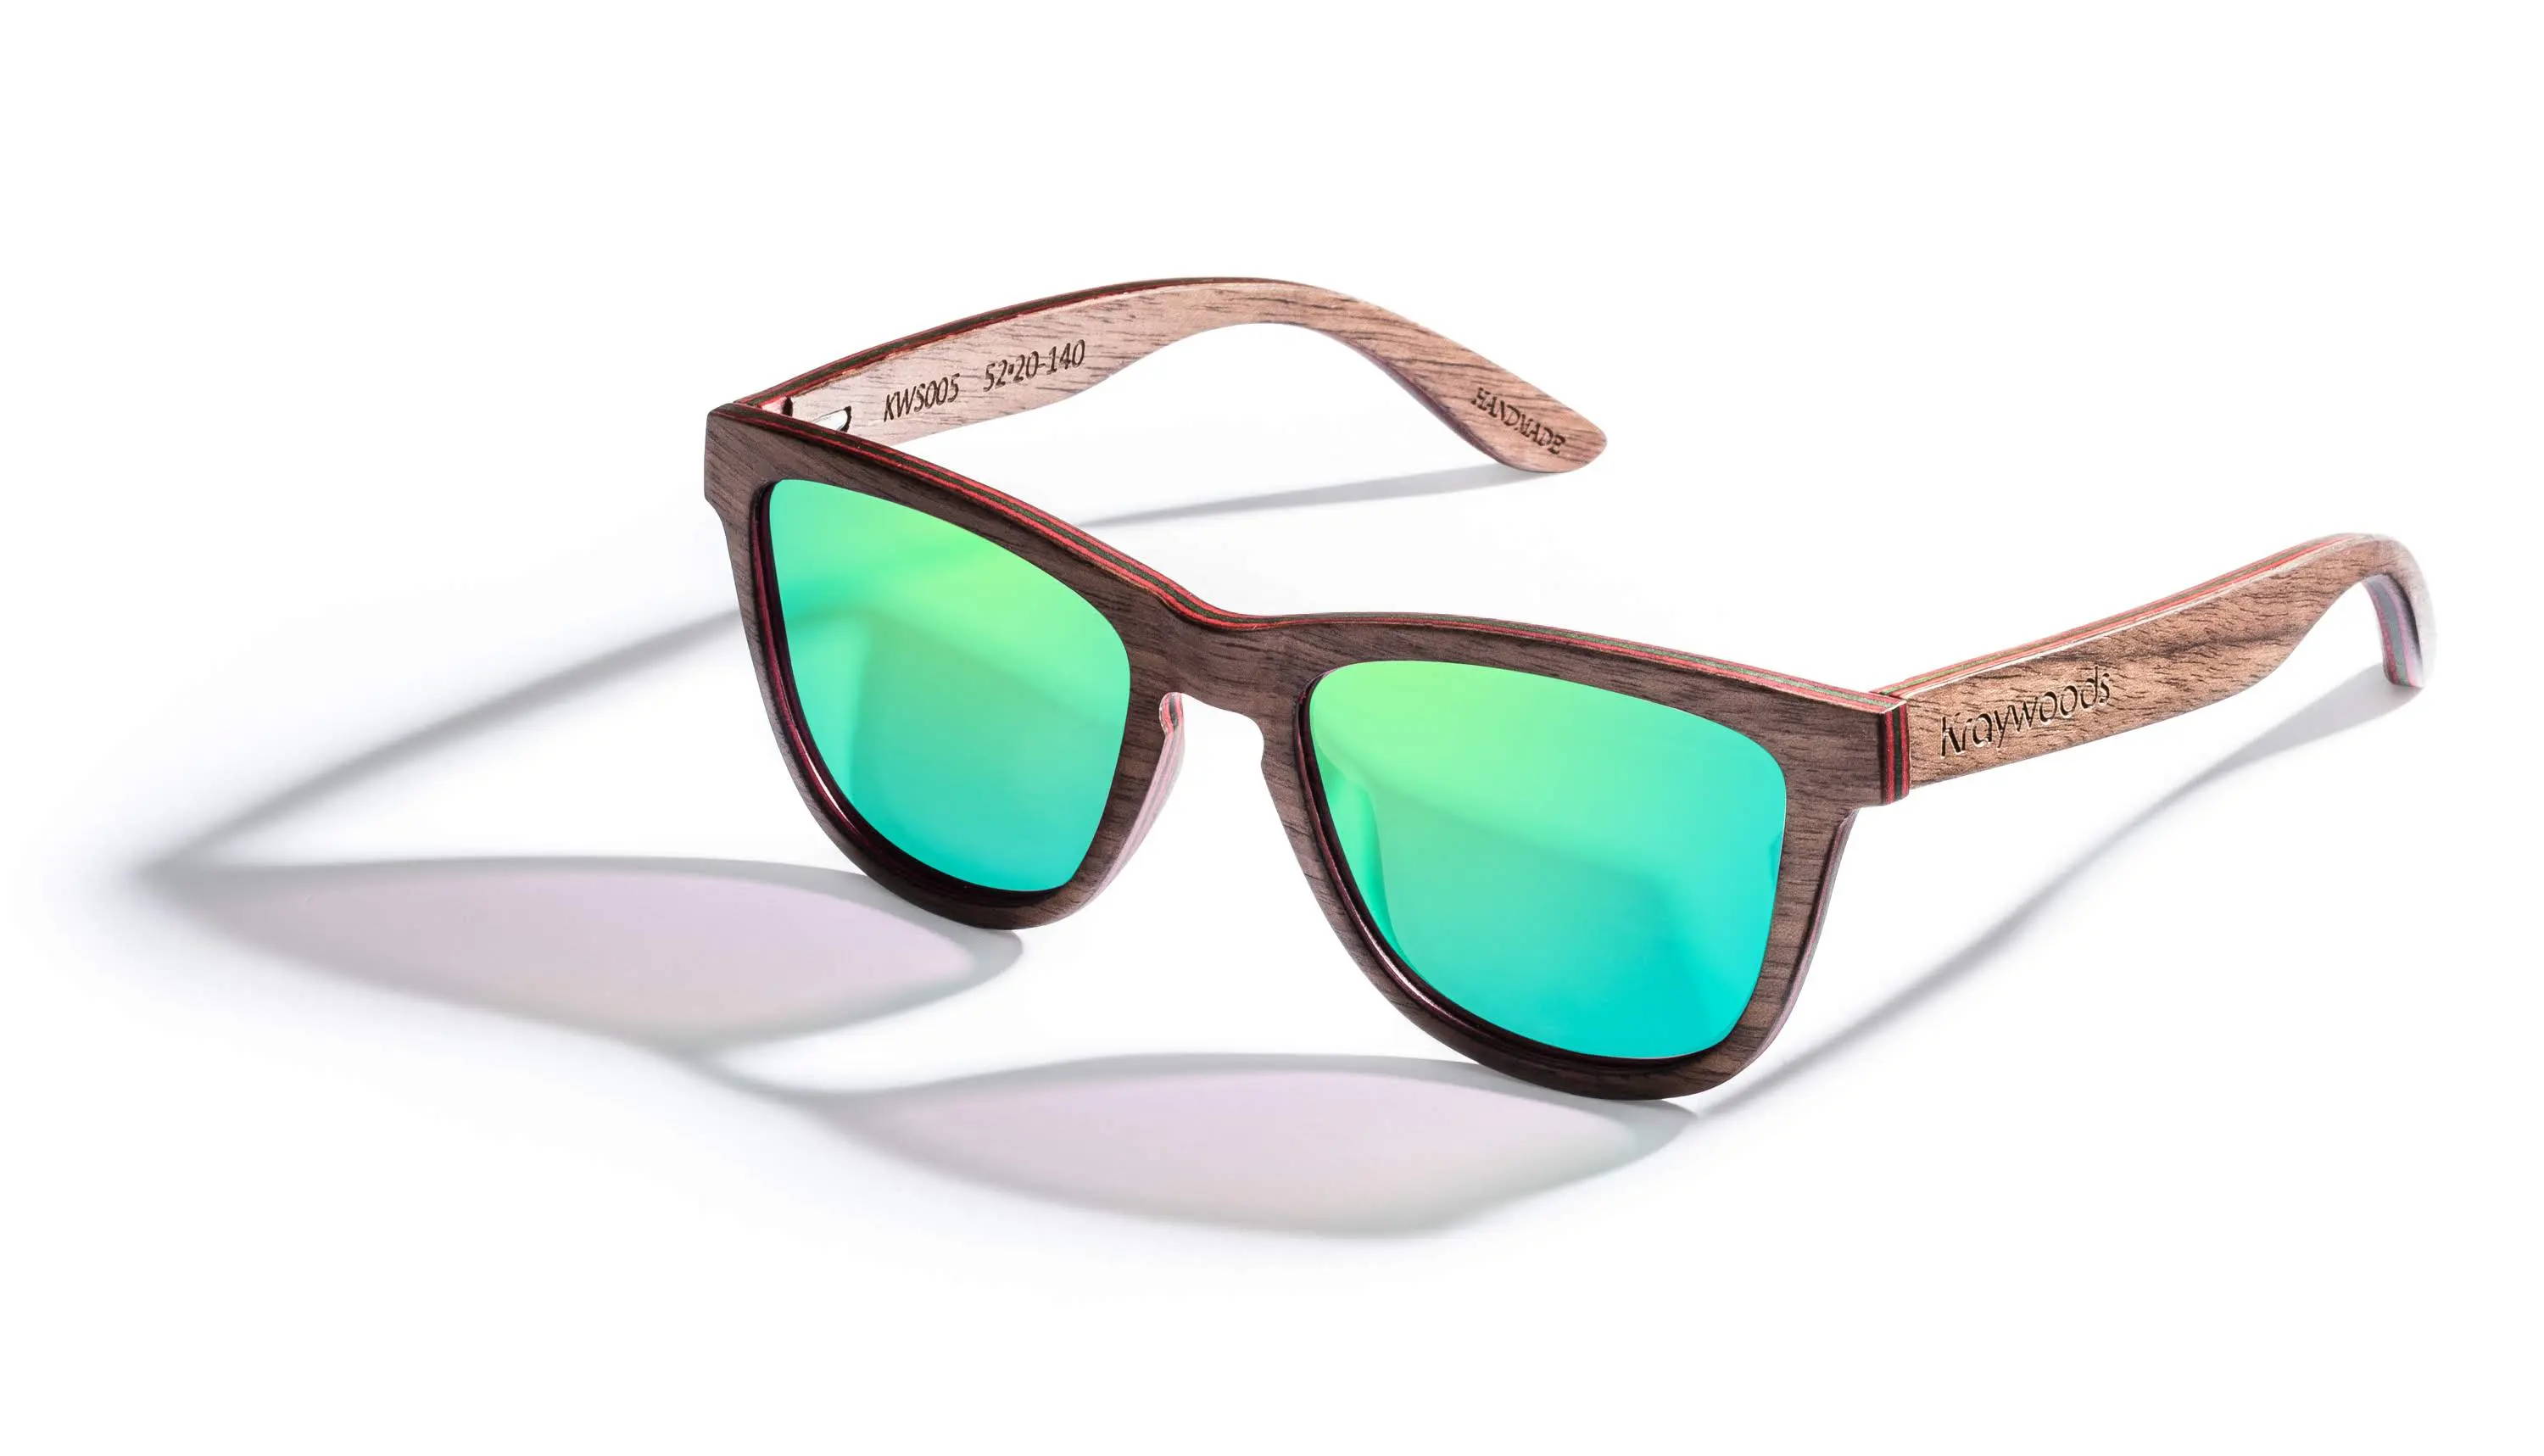 Racer Sunglasses with polarized green mirror lenses